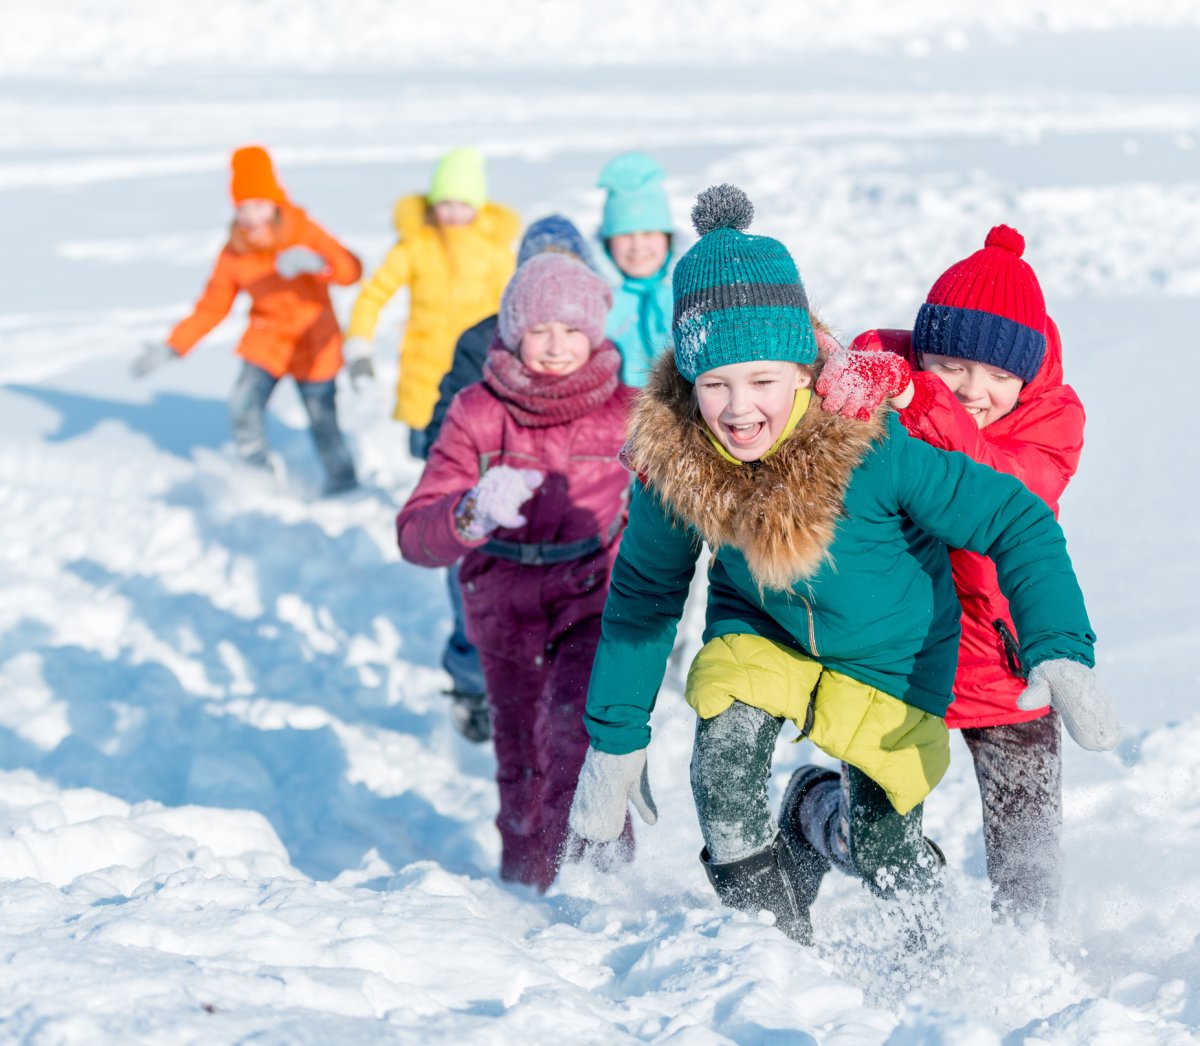 How Long Can Kids Stay in the Snow?